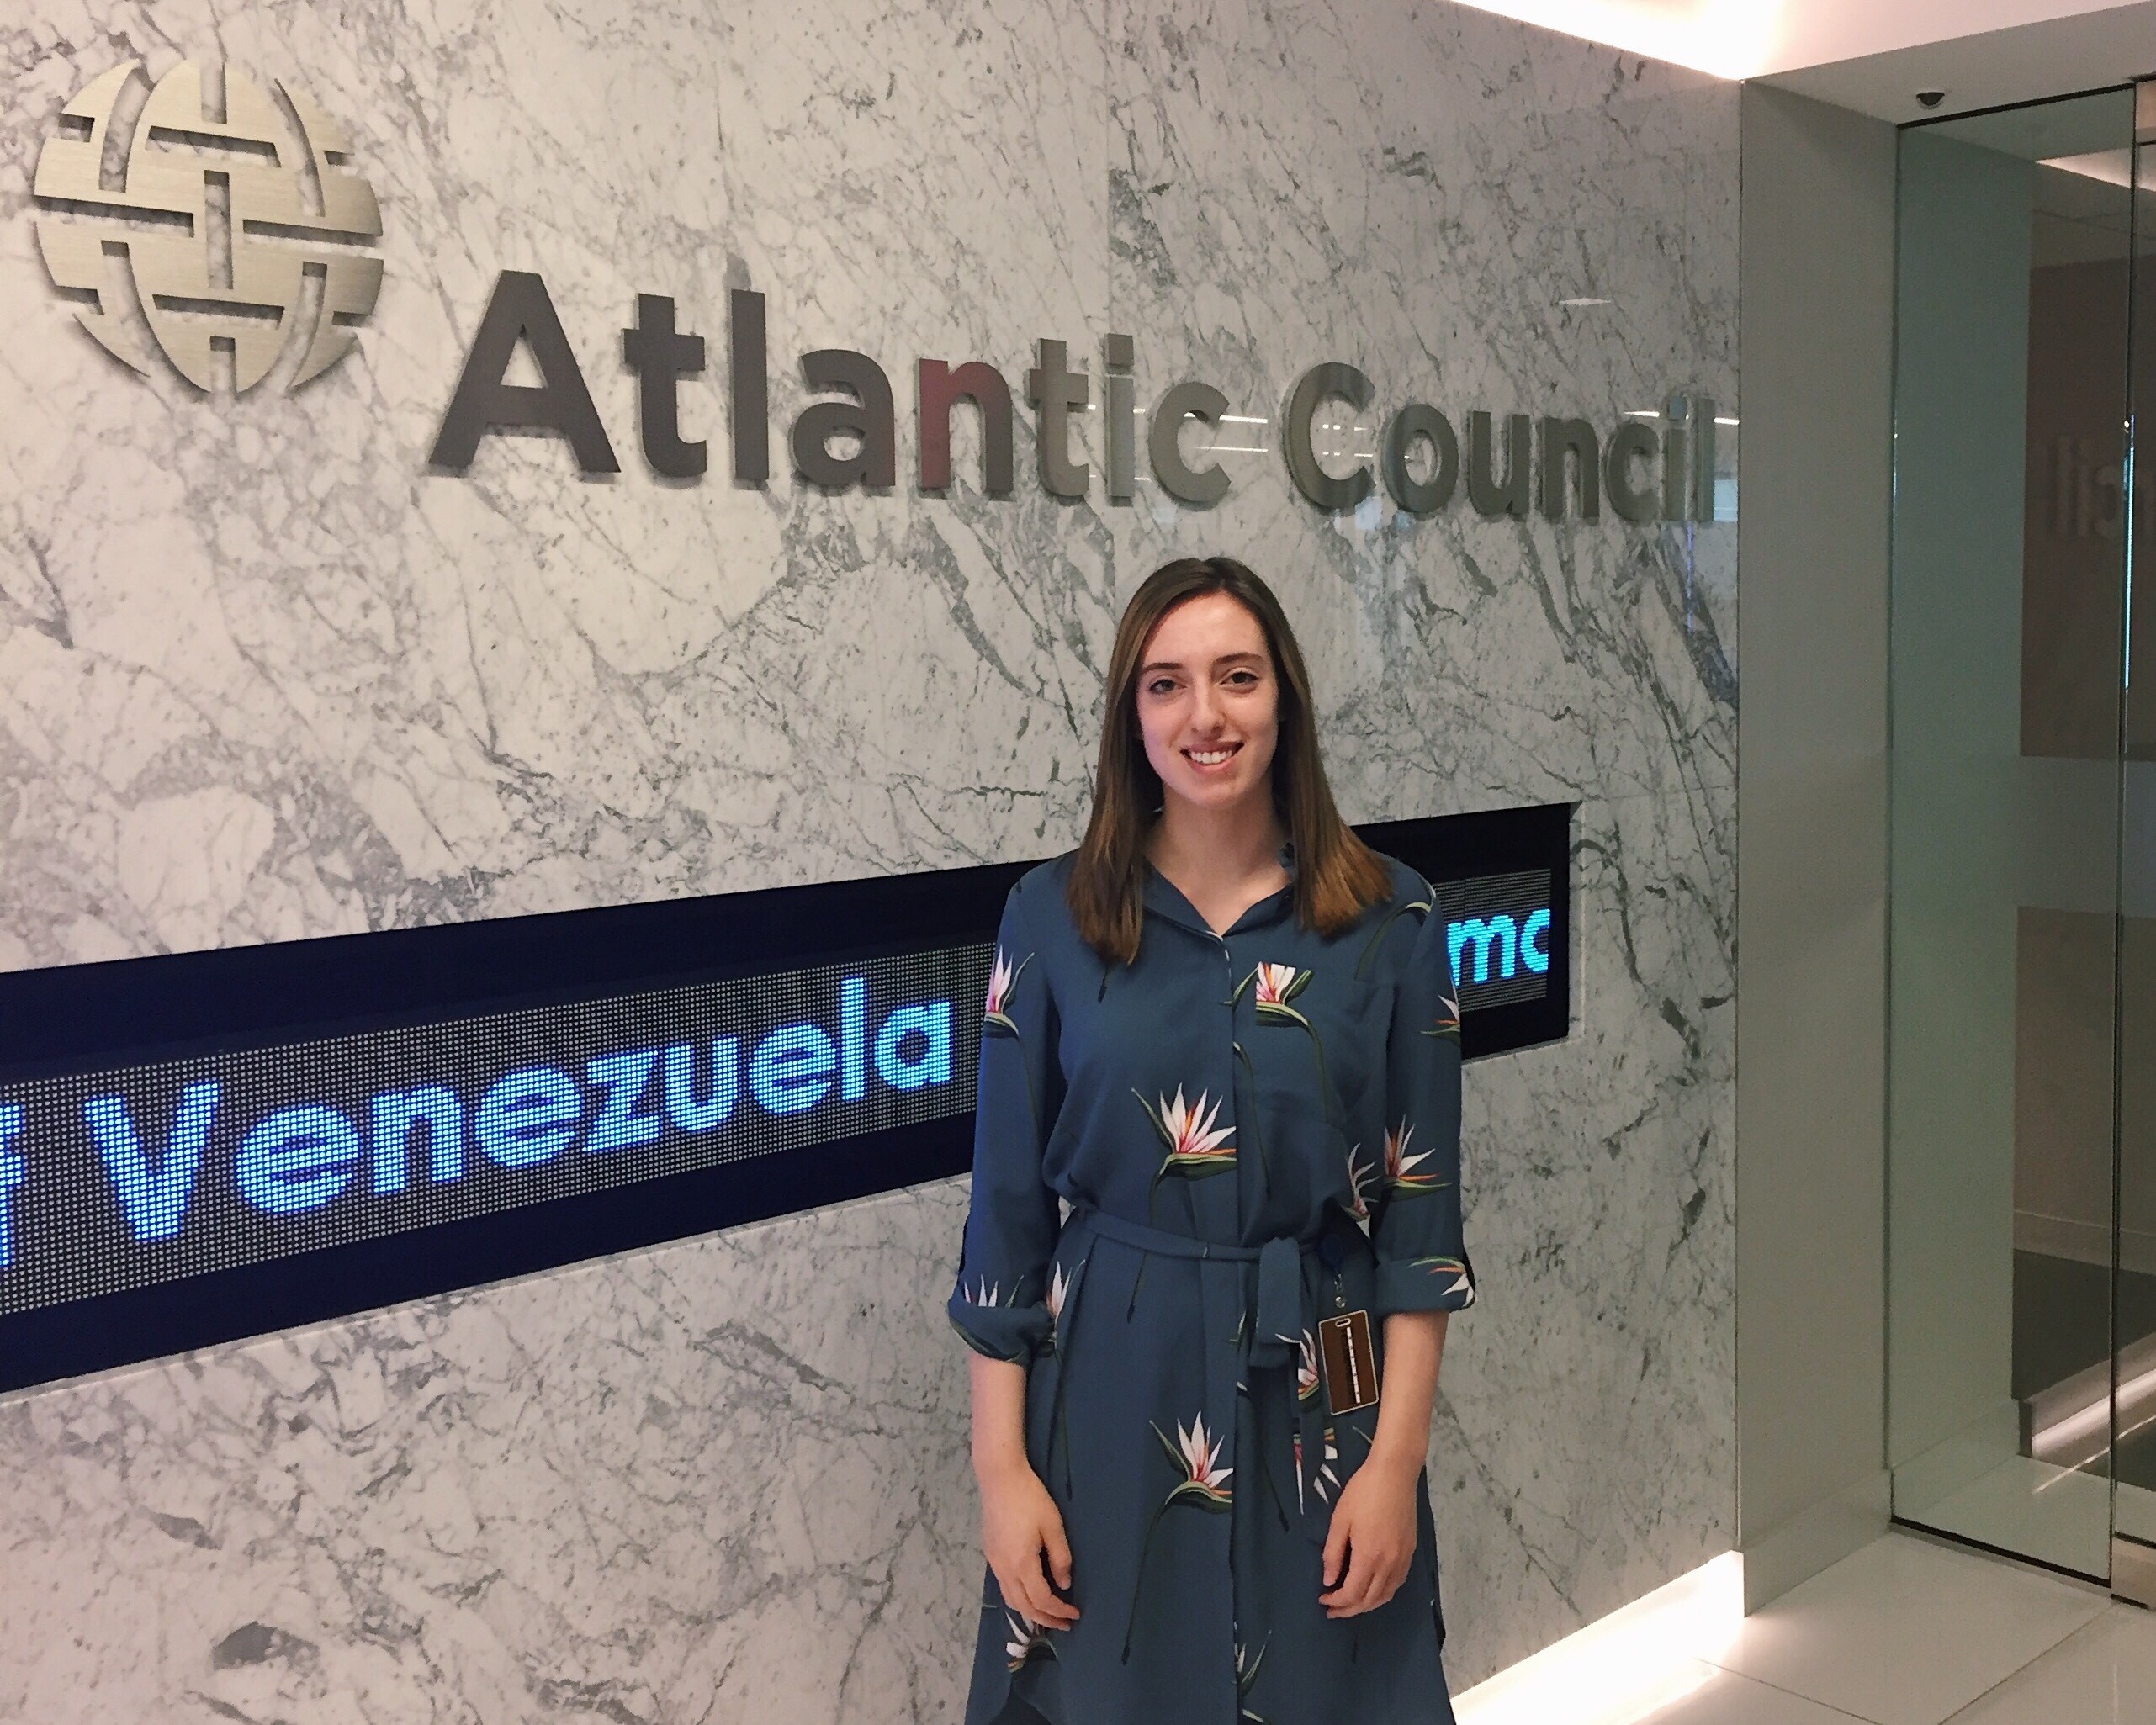 Laura Zwerling '18 is using her internship experience to inform her career goals after graduation. She spent this summer as an events intern at the Atlantic Council.